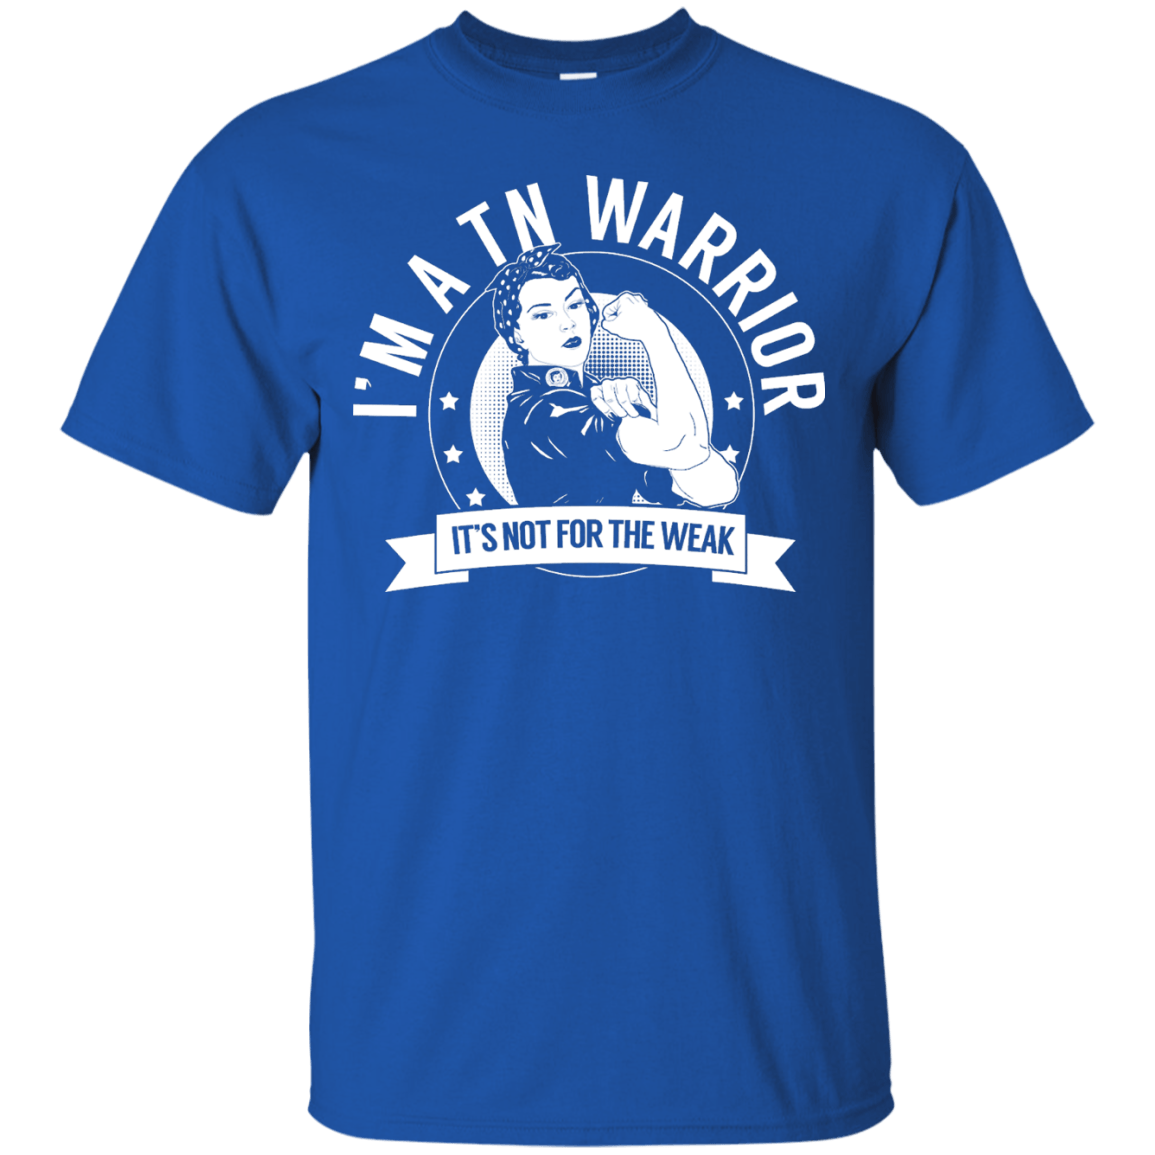 Trigeminal Neuralgia - TN Warrior Not For The Weak Unisex Shirt - The Unchargeables